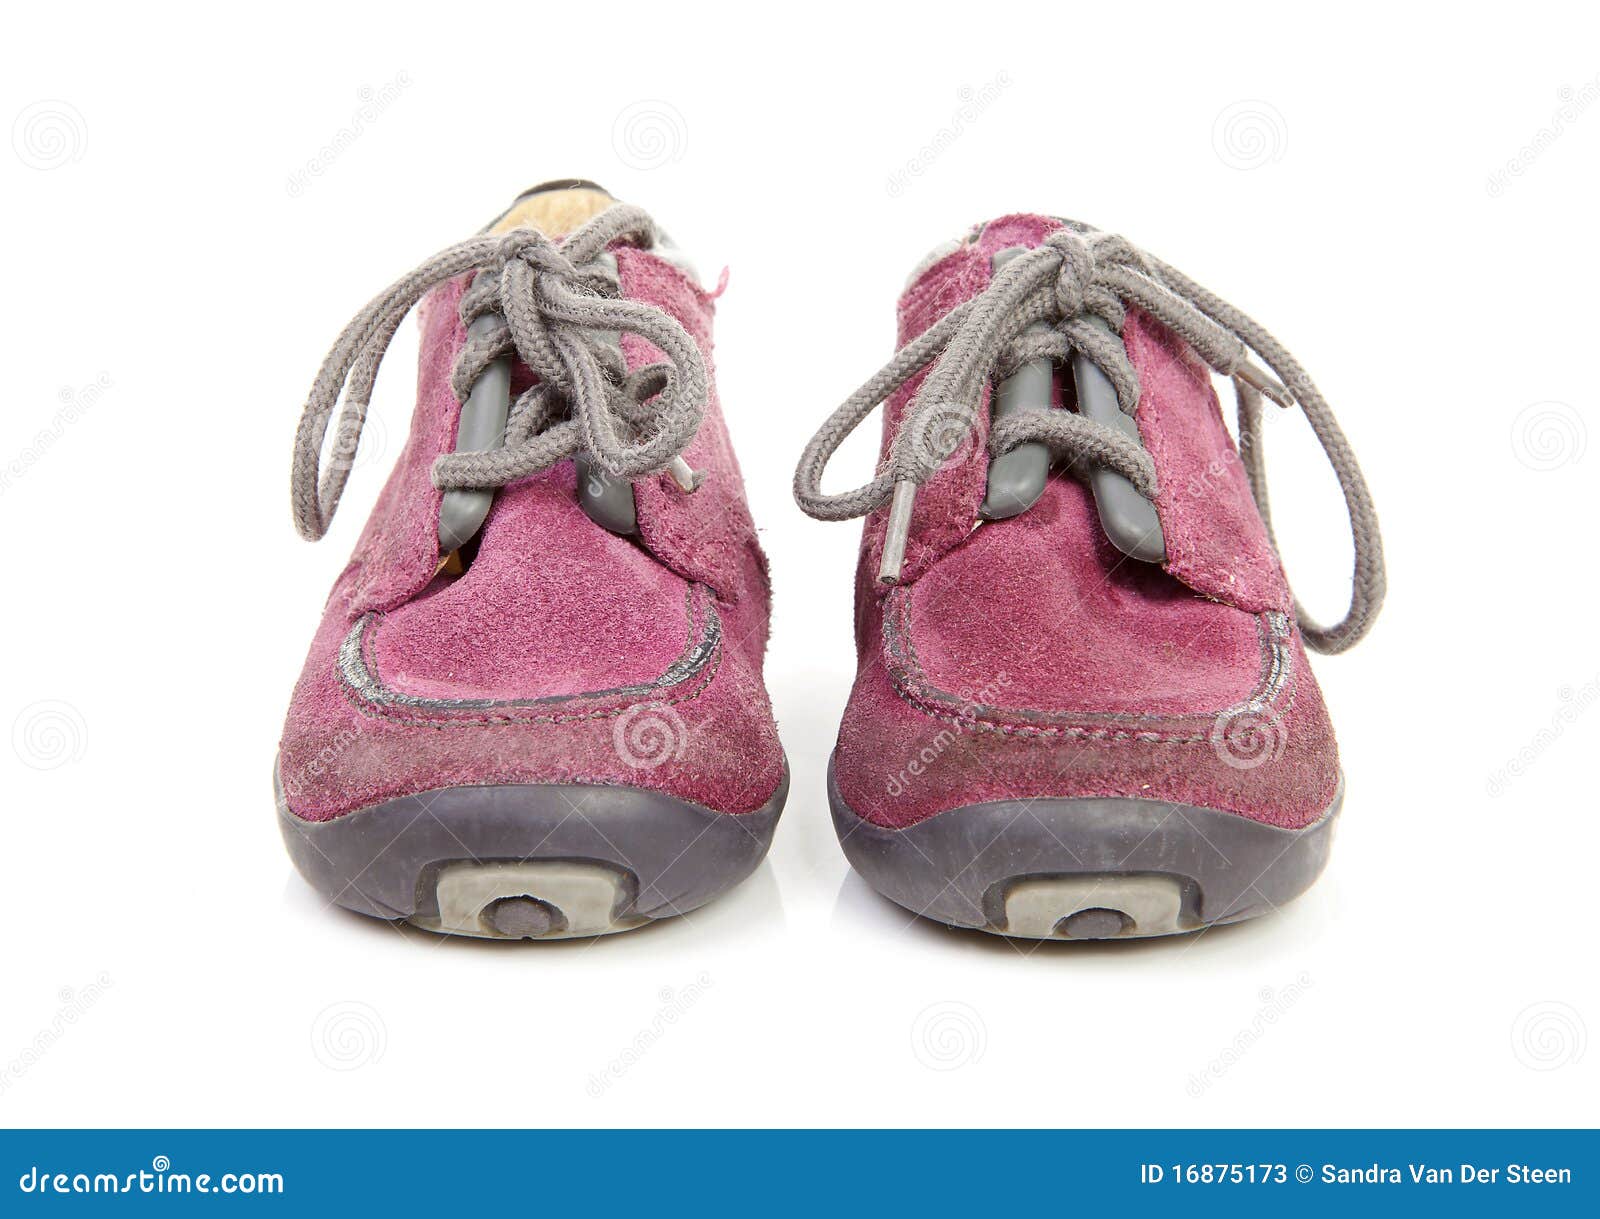 Purple Children S Shoes Worn Stock Image - Image of fashion, shoes ...